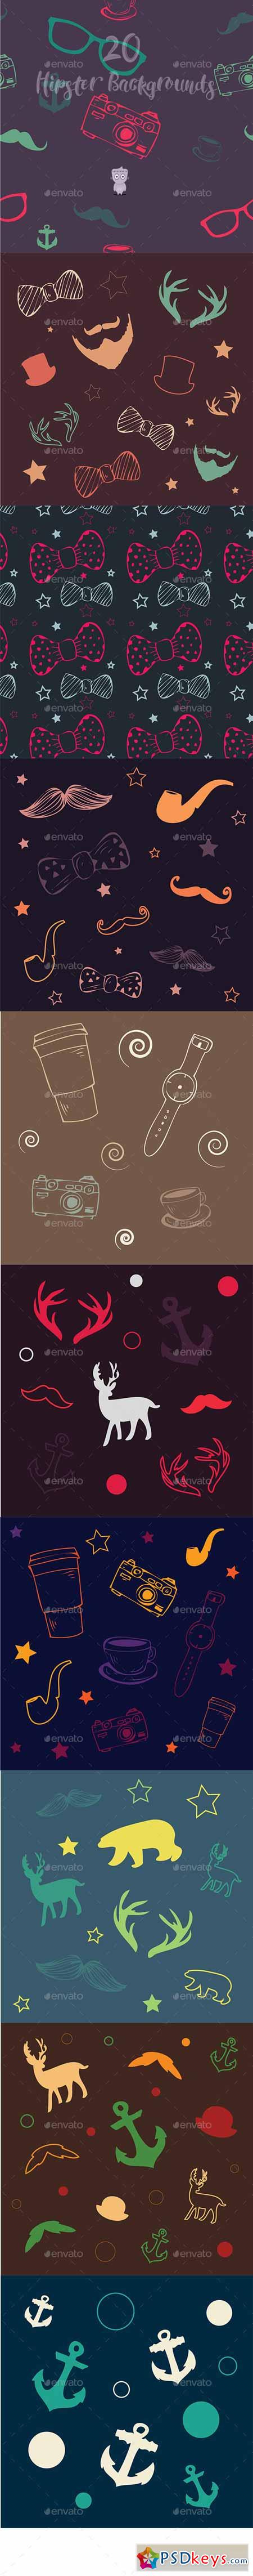 20 Hipster Backgrounds 11481726